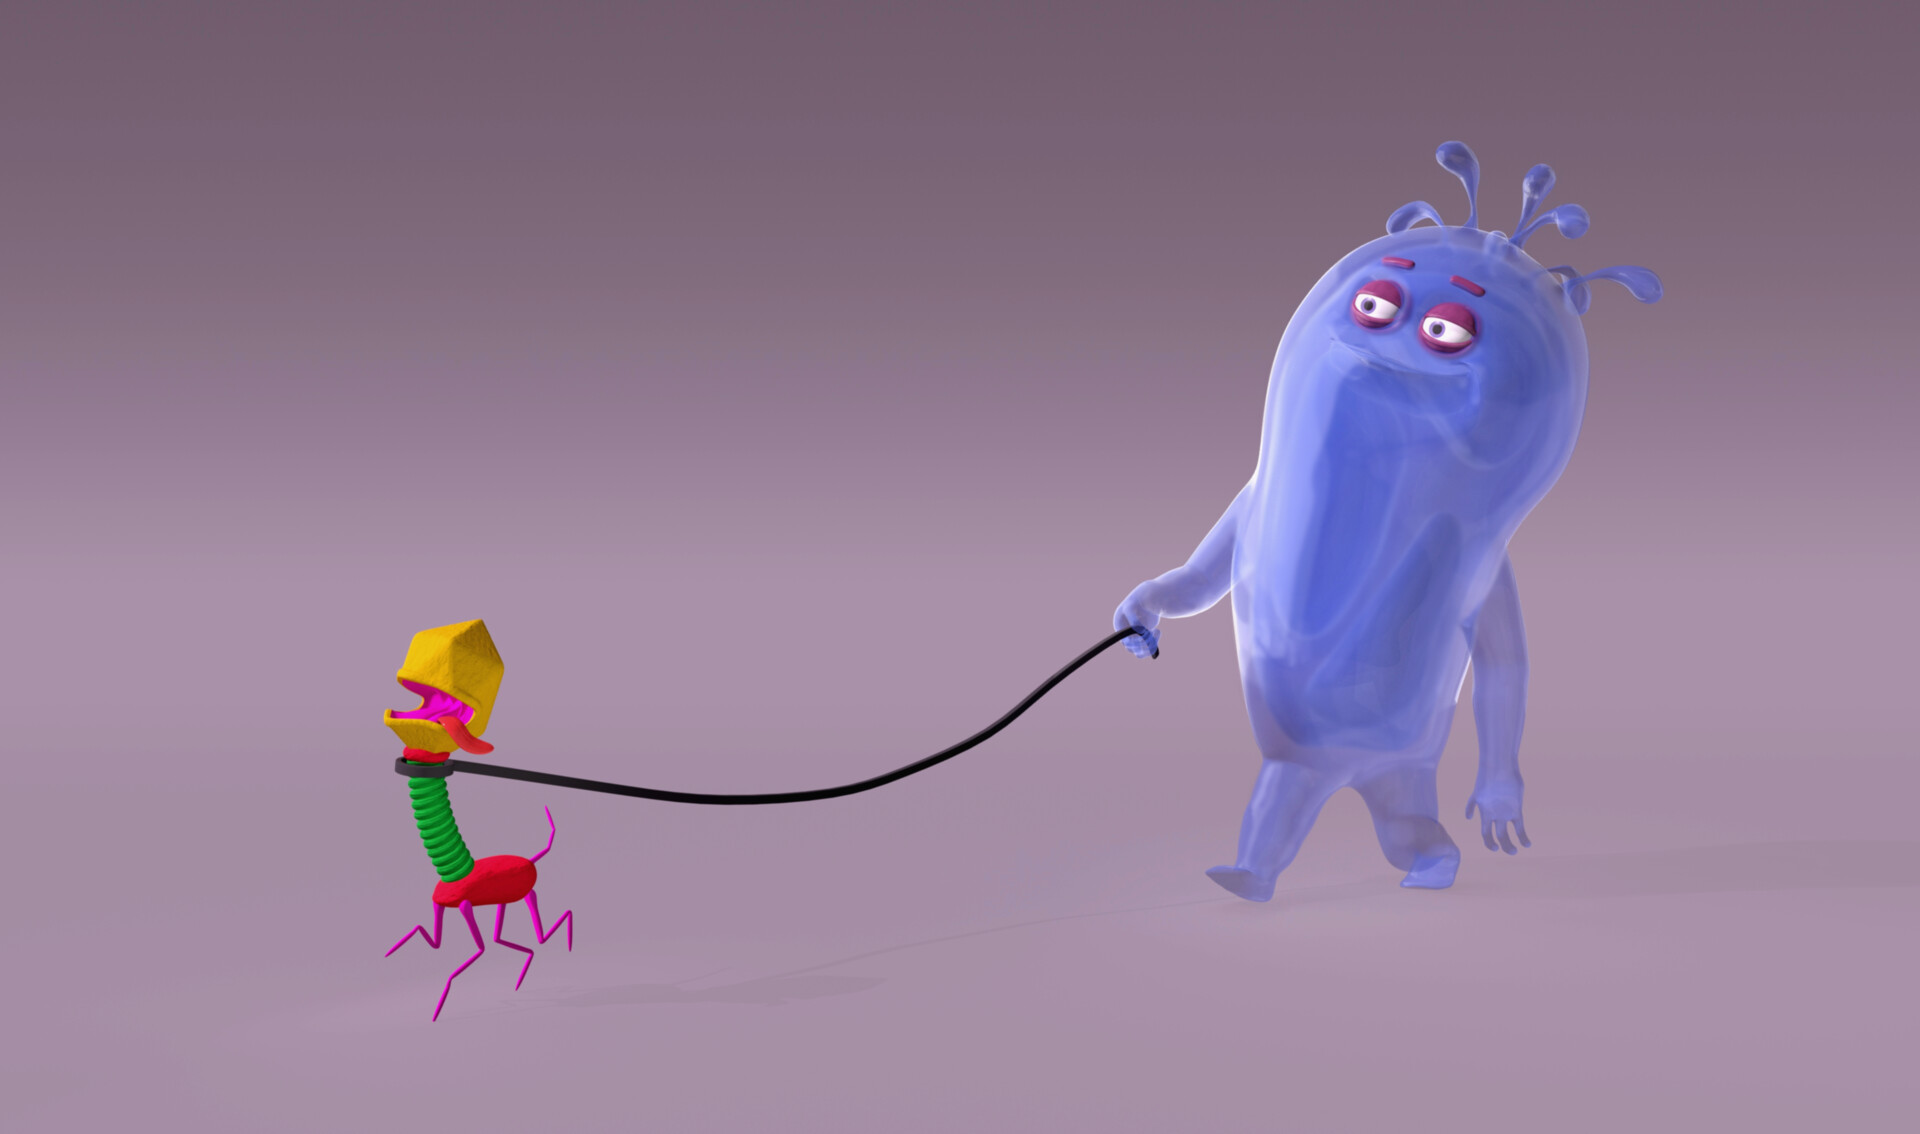 monsters vs aliens bob and jelly